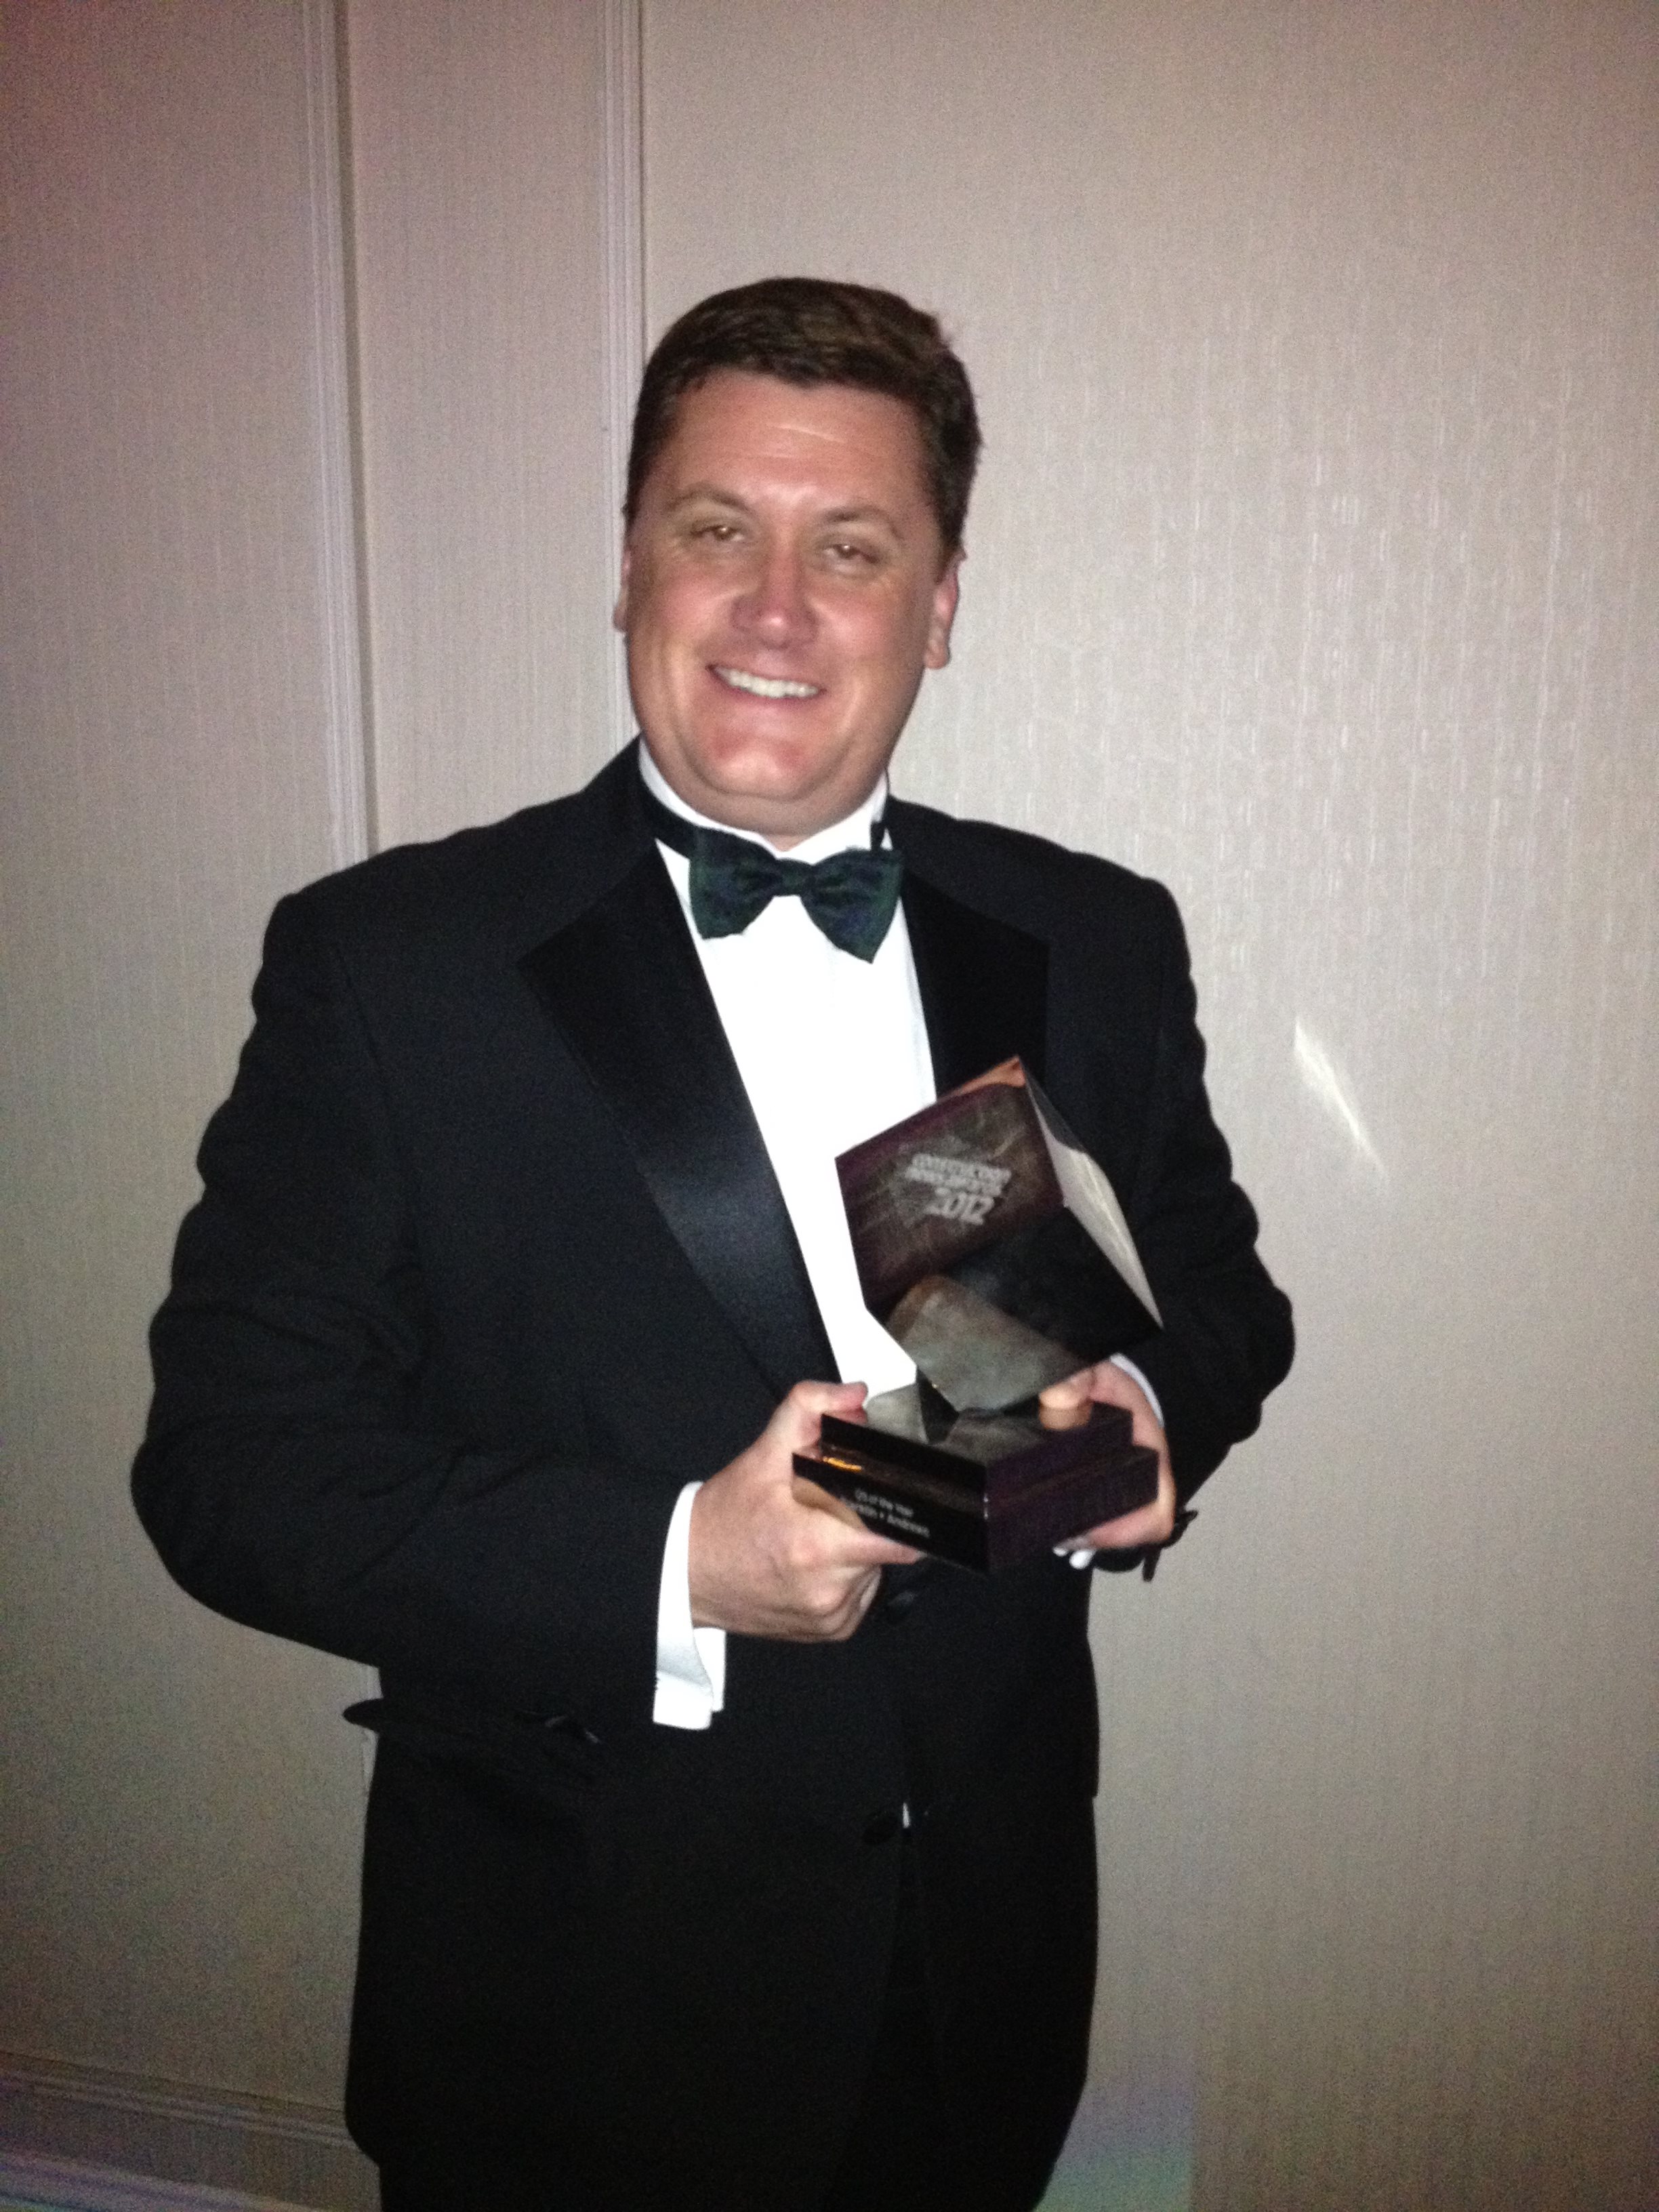 Alasdair accepting the 2012 Construction News Quantity Surveying Practice of the Year Award.